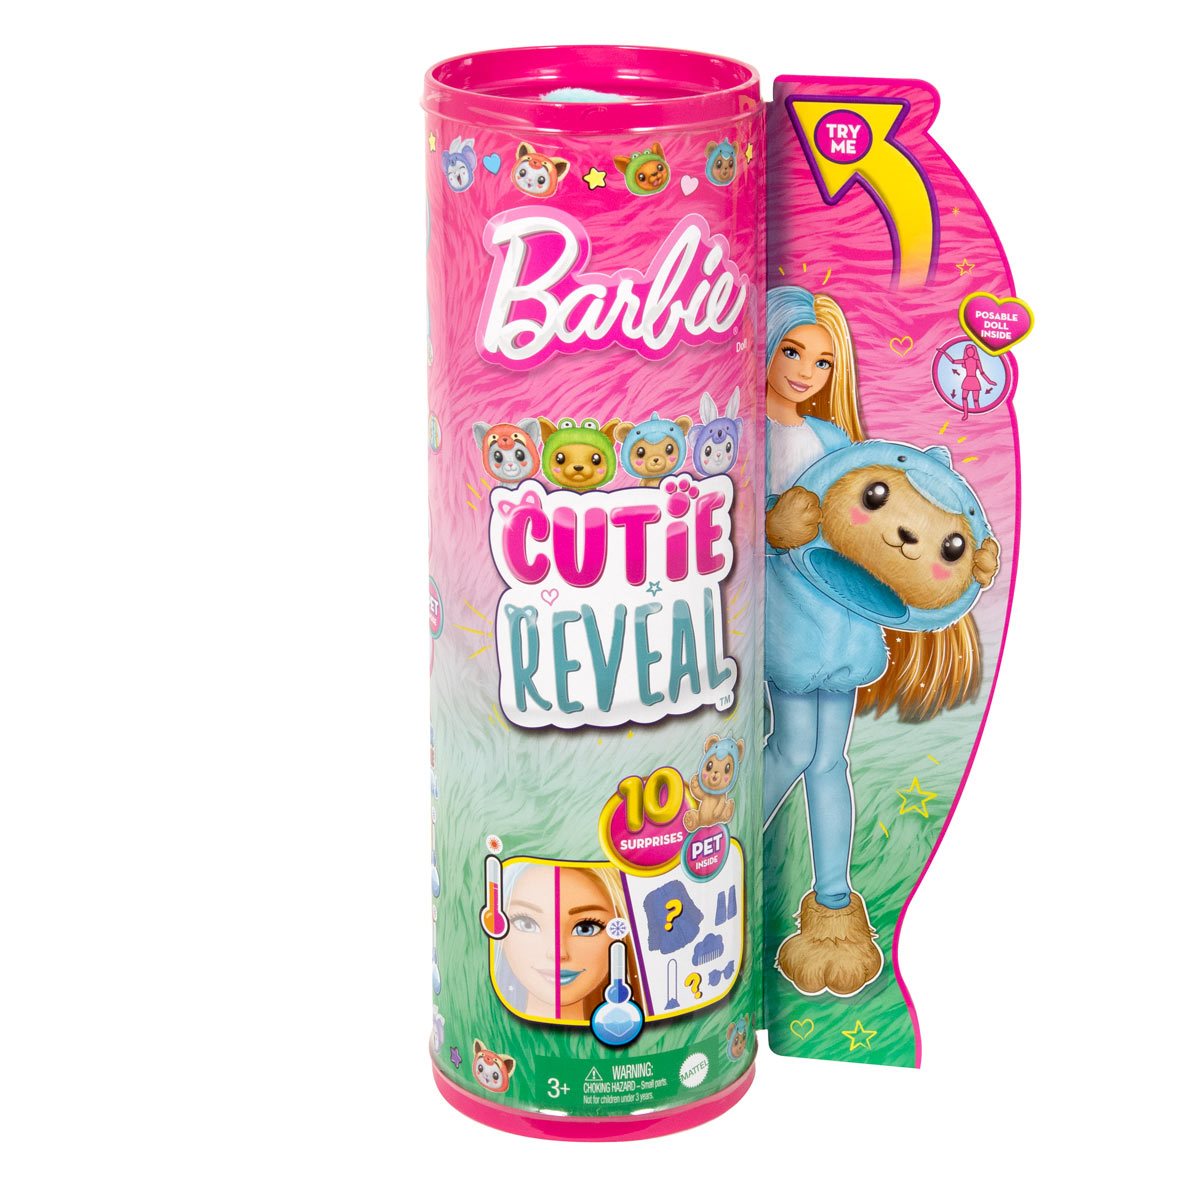 BARBIE CUTIE REVEAL - The Toy Insider